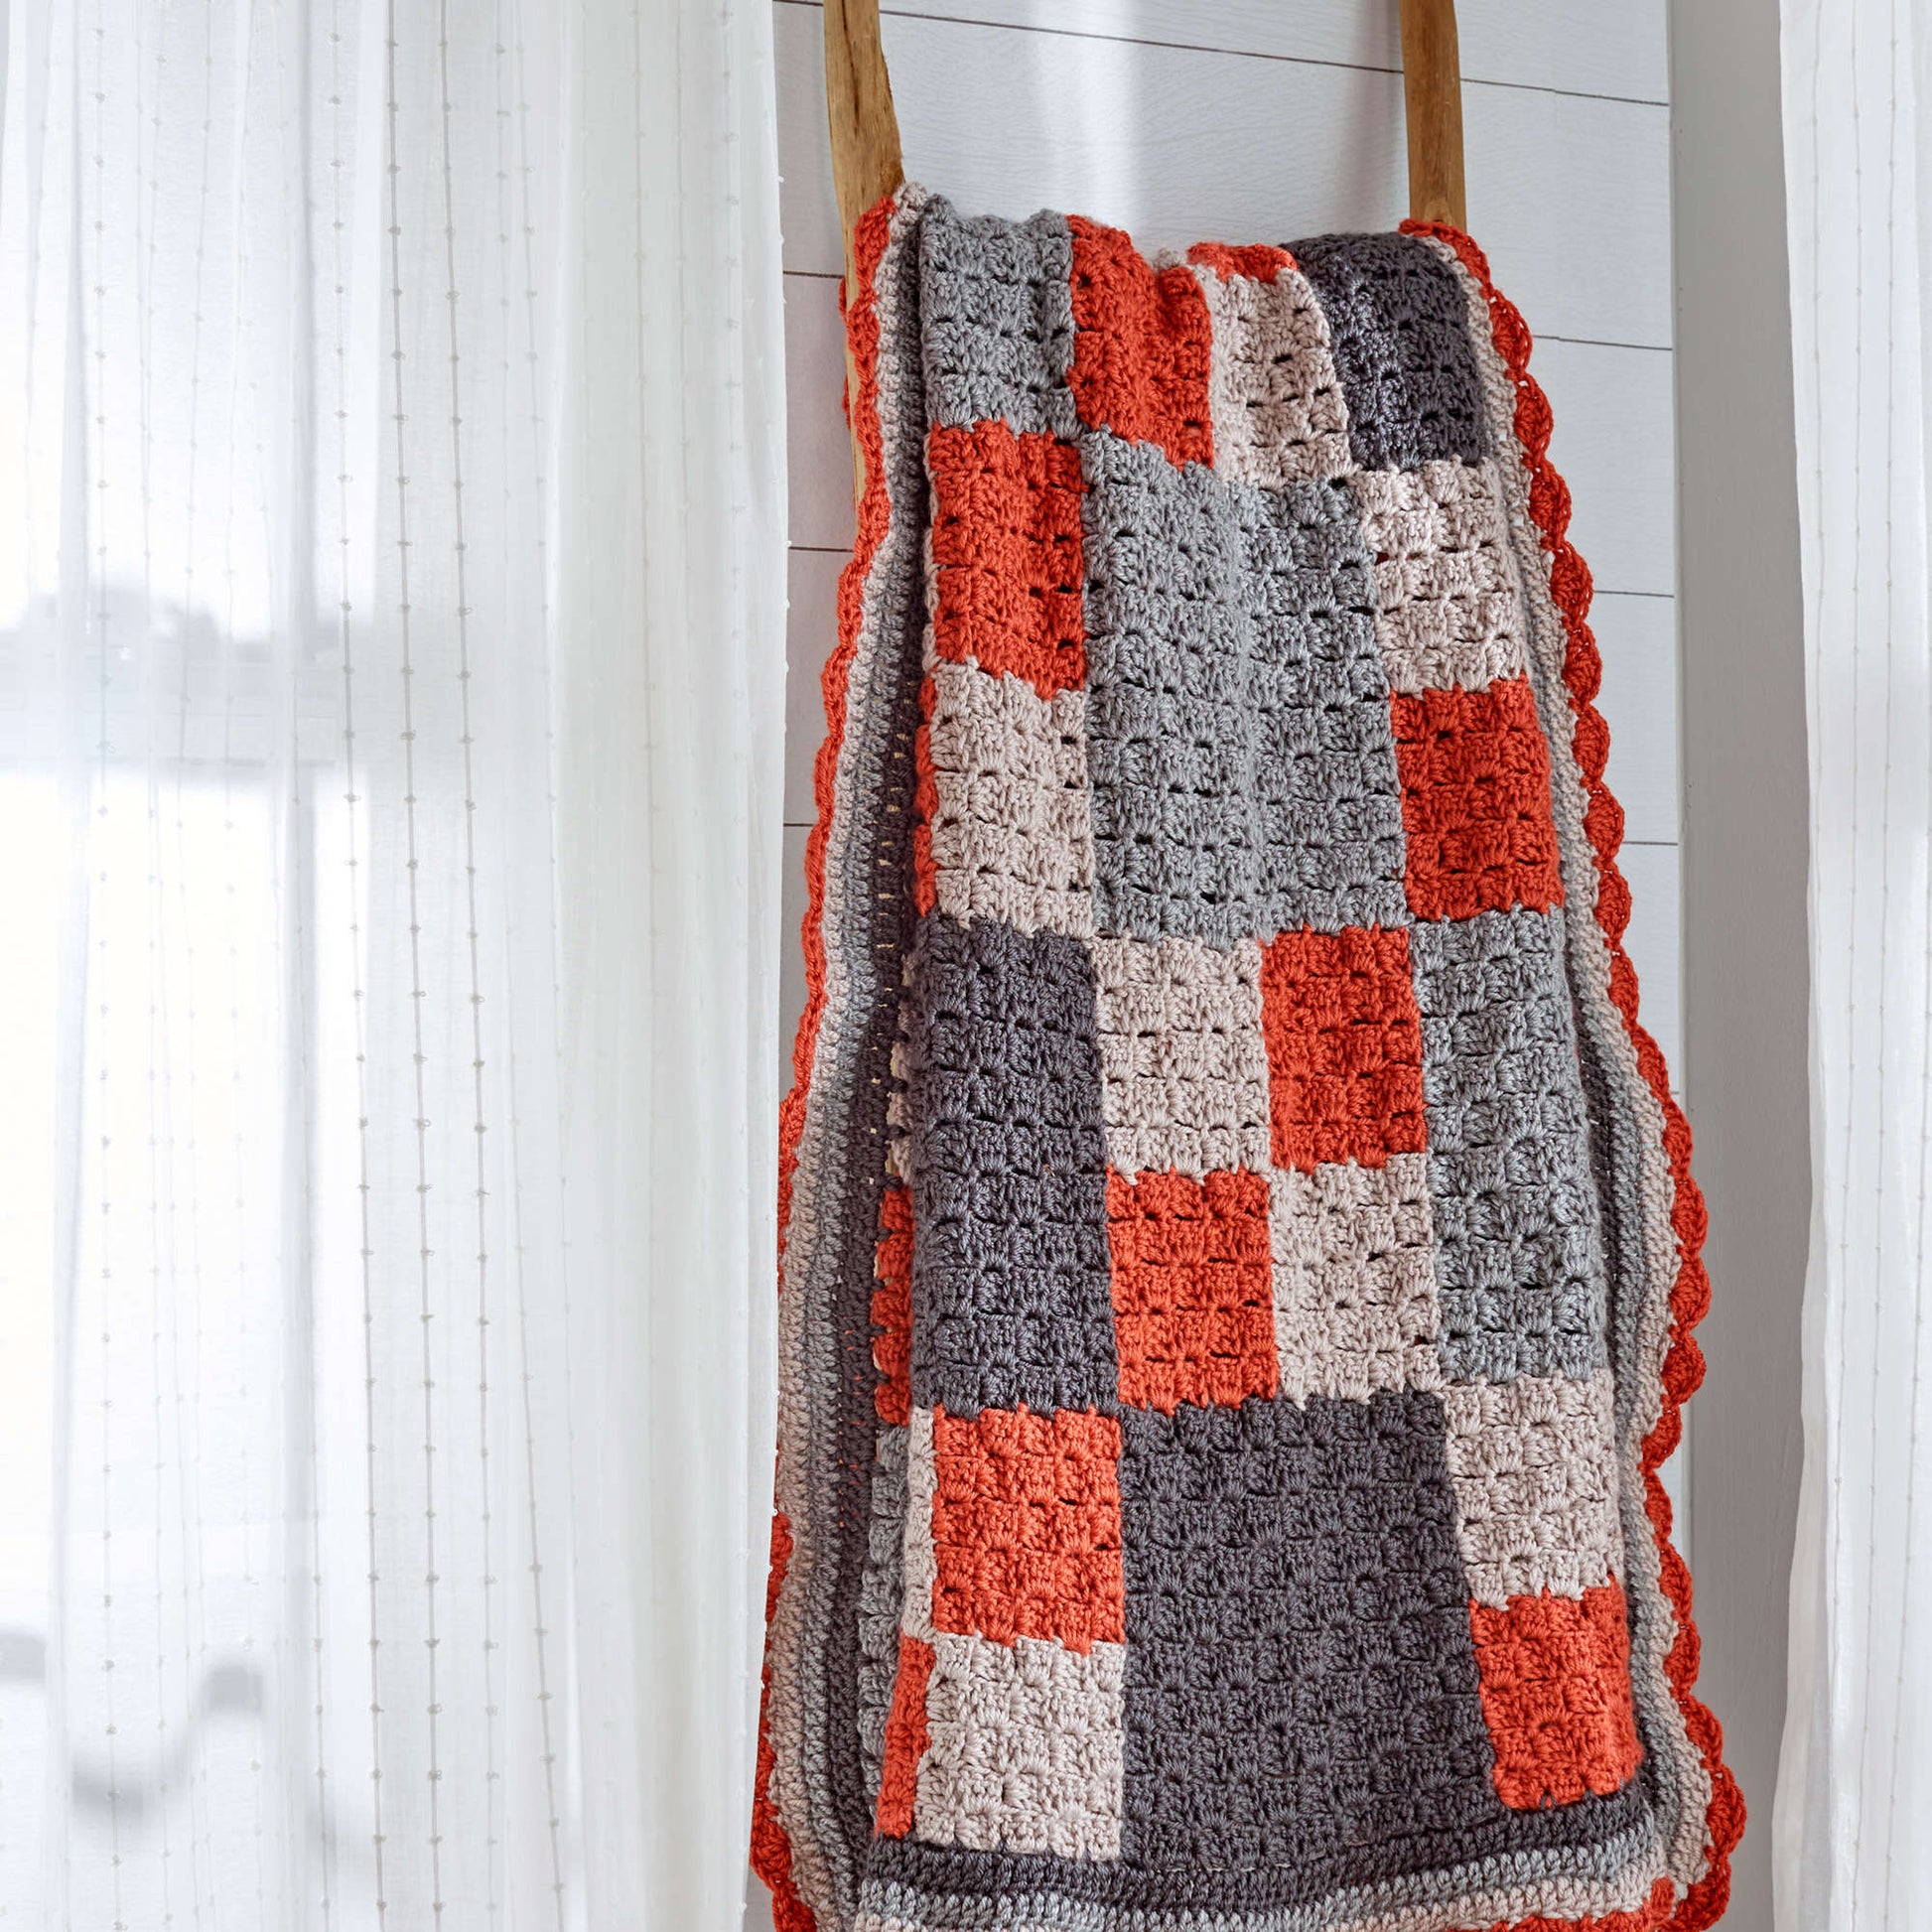 Free Red Heart Four-Patch Throw Crochet Pattern